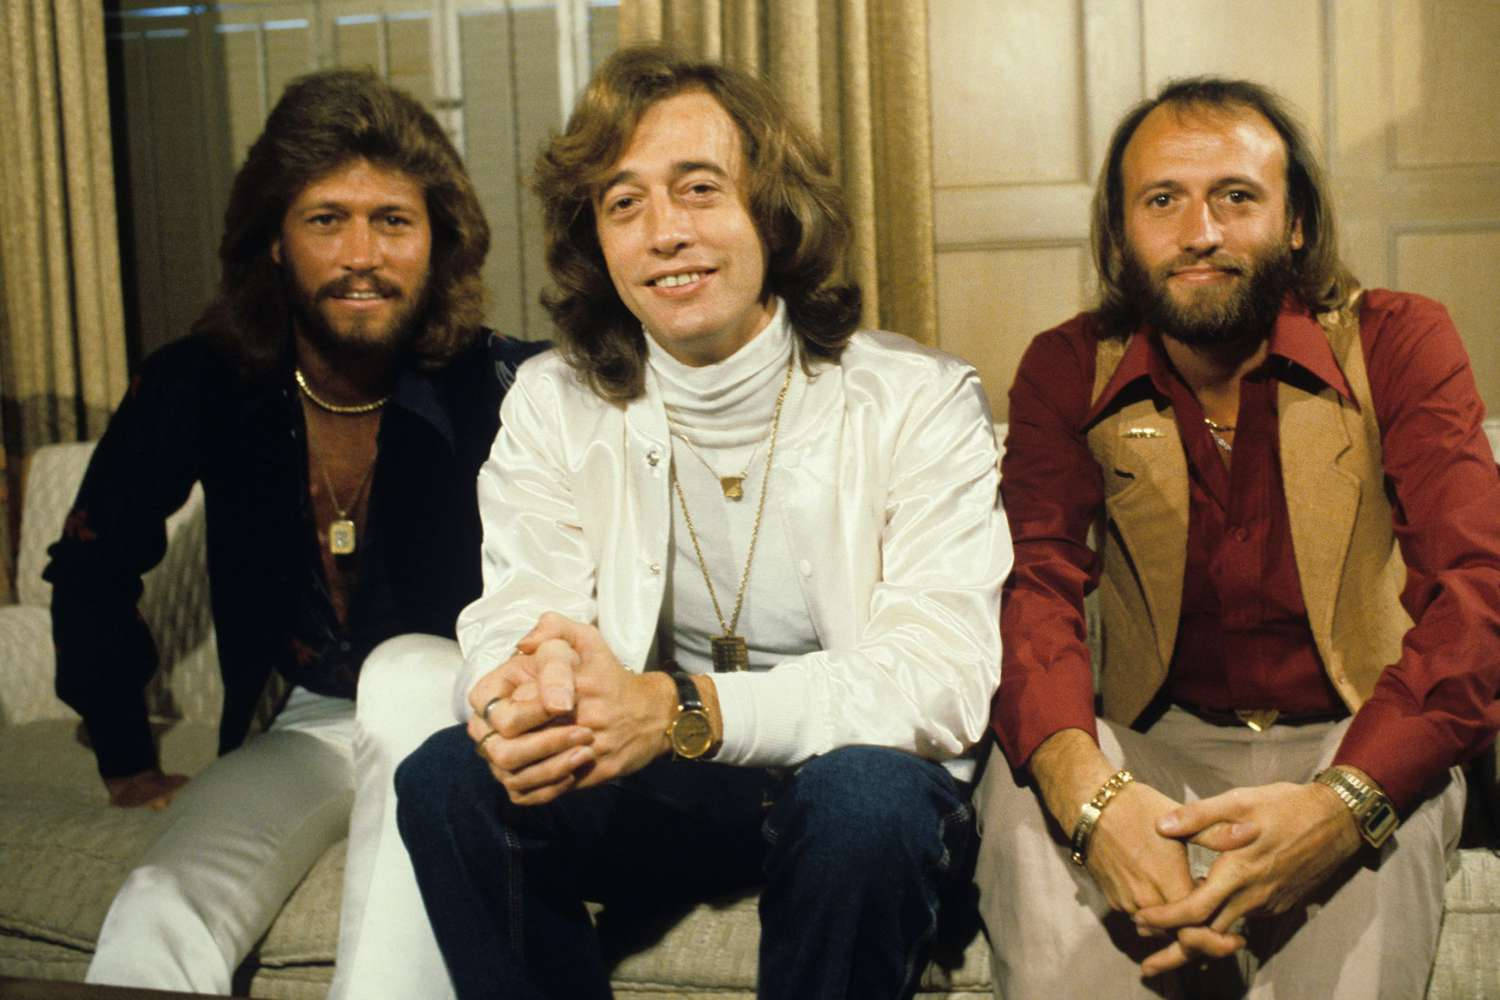 Bee Gees Popular Disco Band Portrait Background